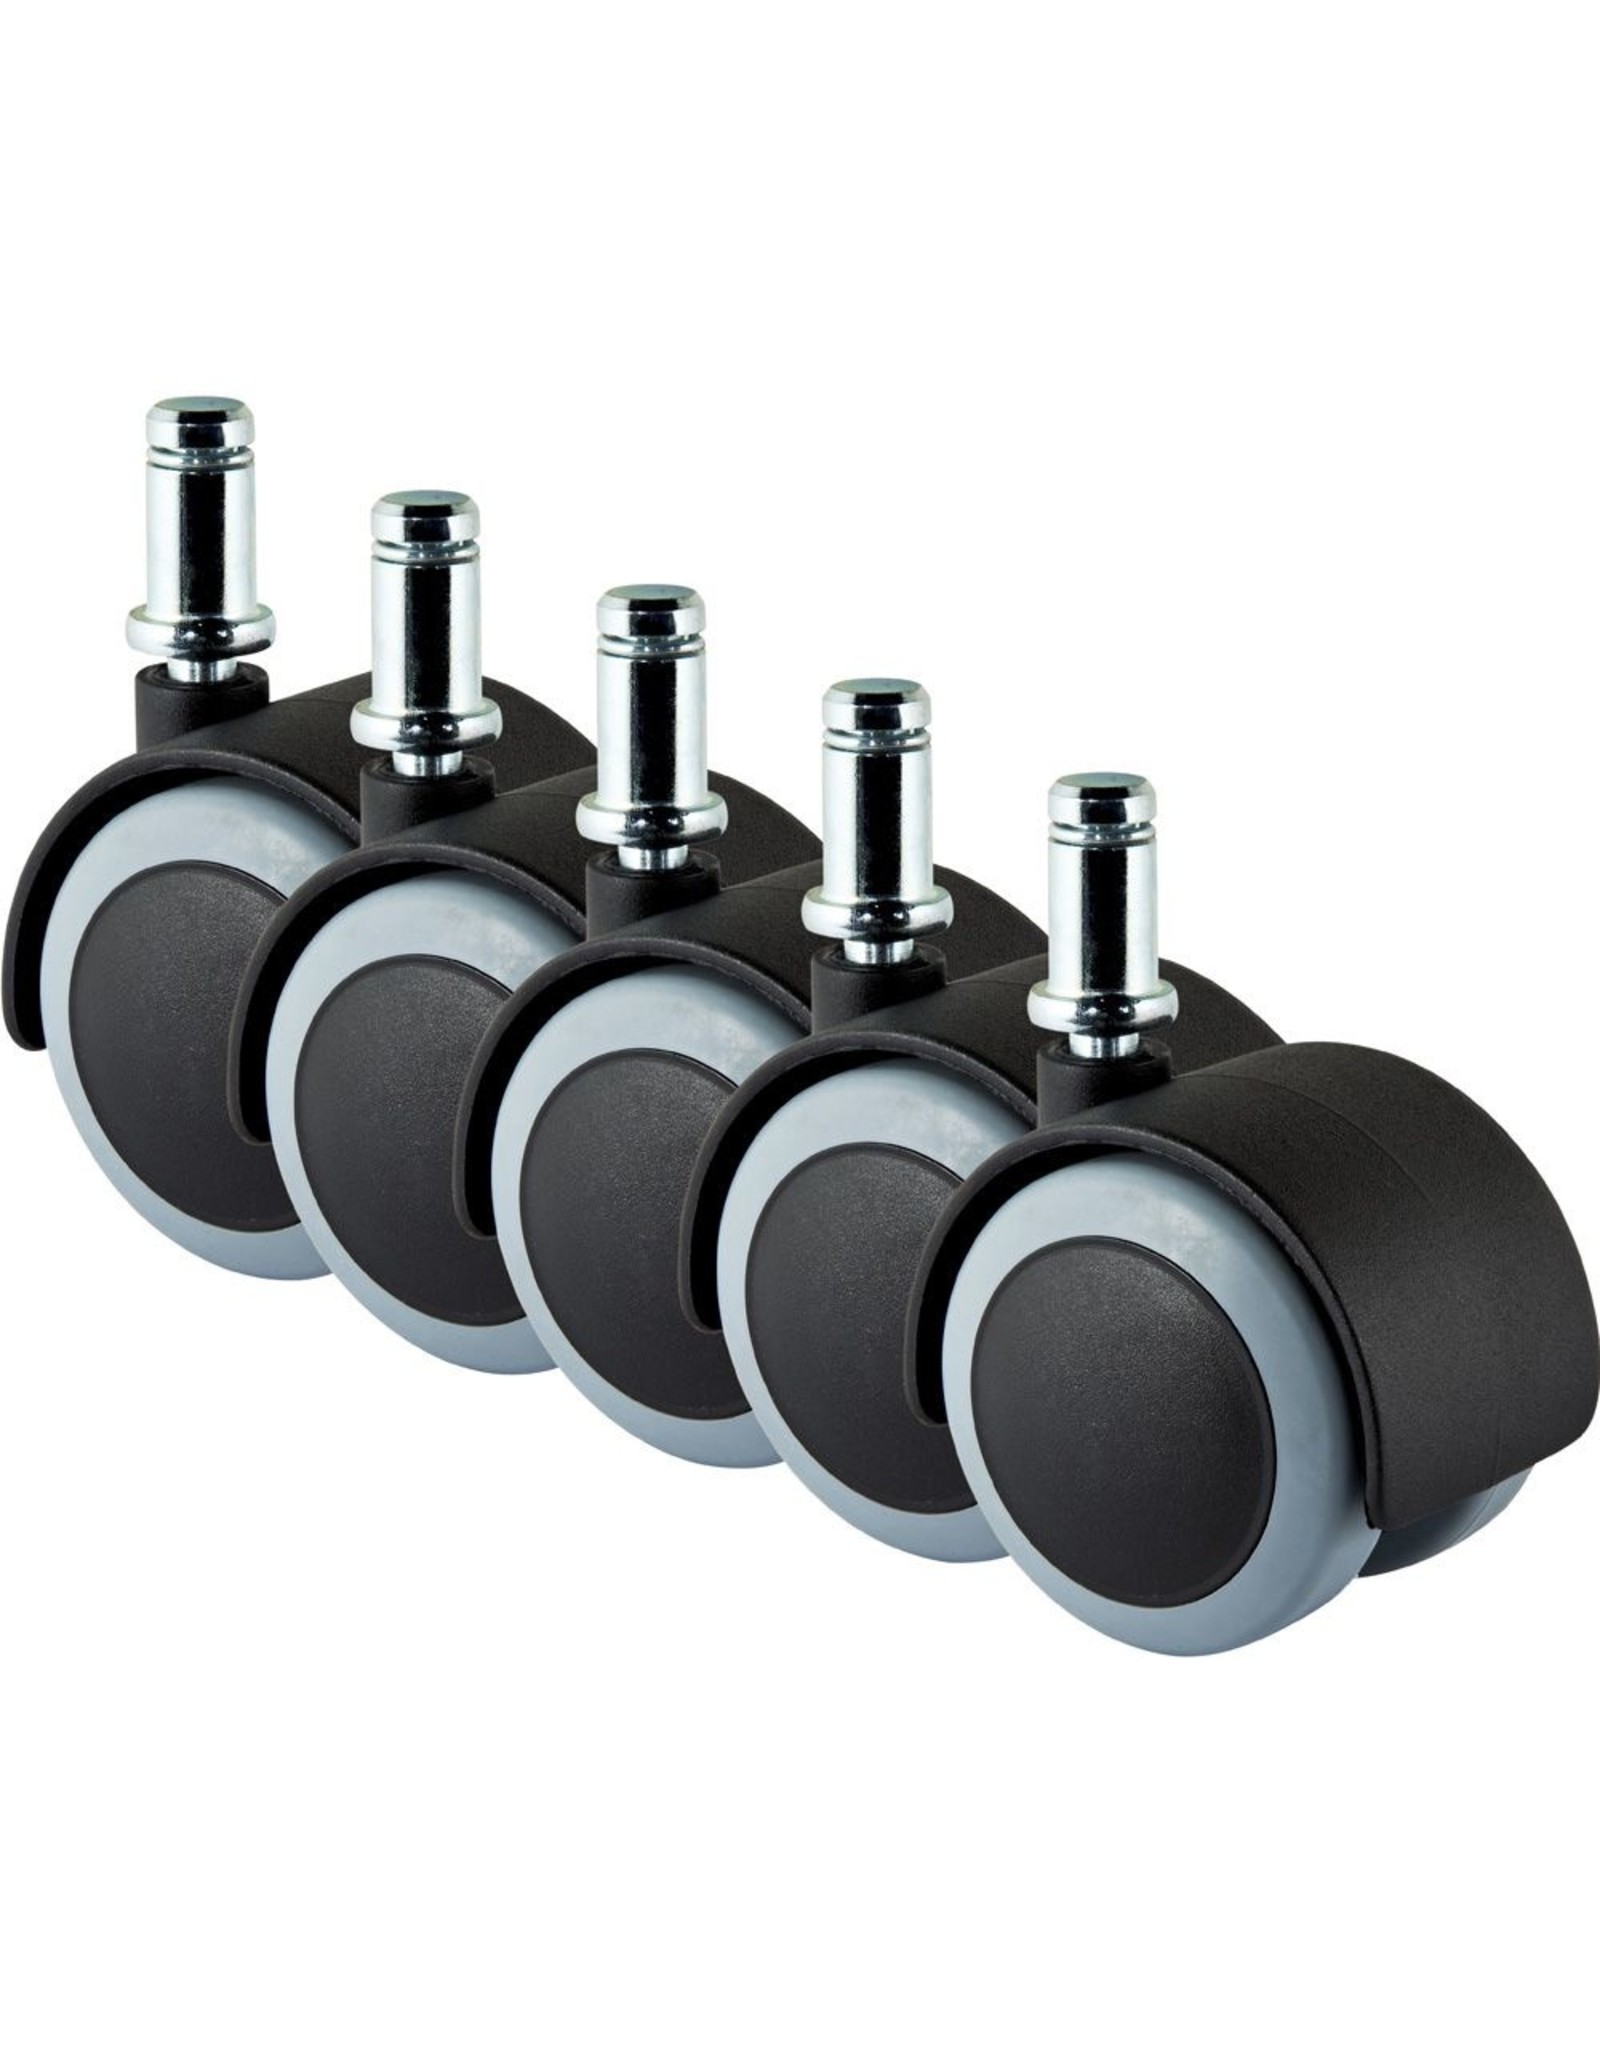 SW70 rubber casters (set of 5)